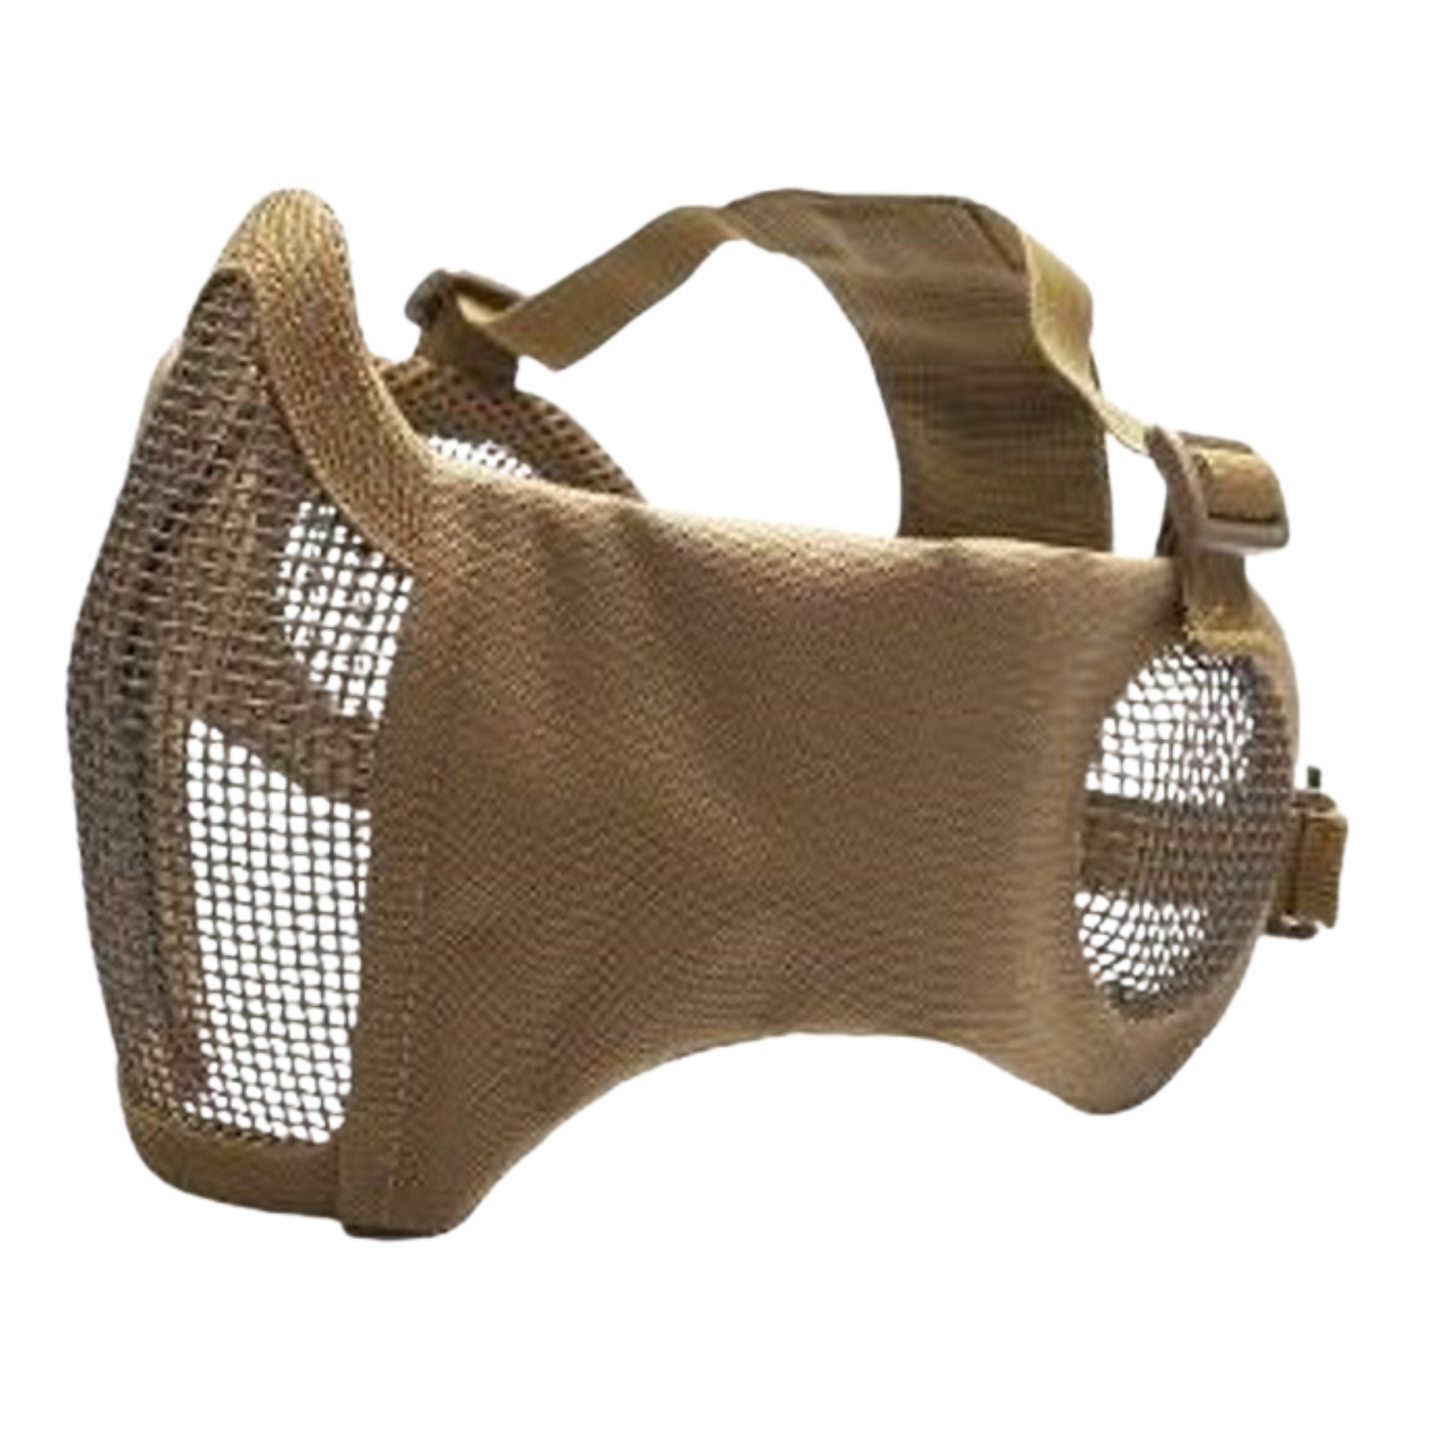 ASG Airsoft Mesh Mask with Ear Protection